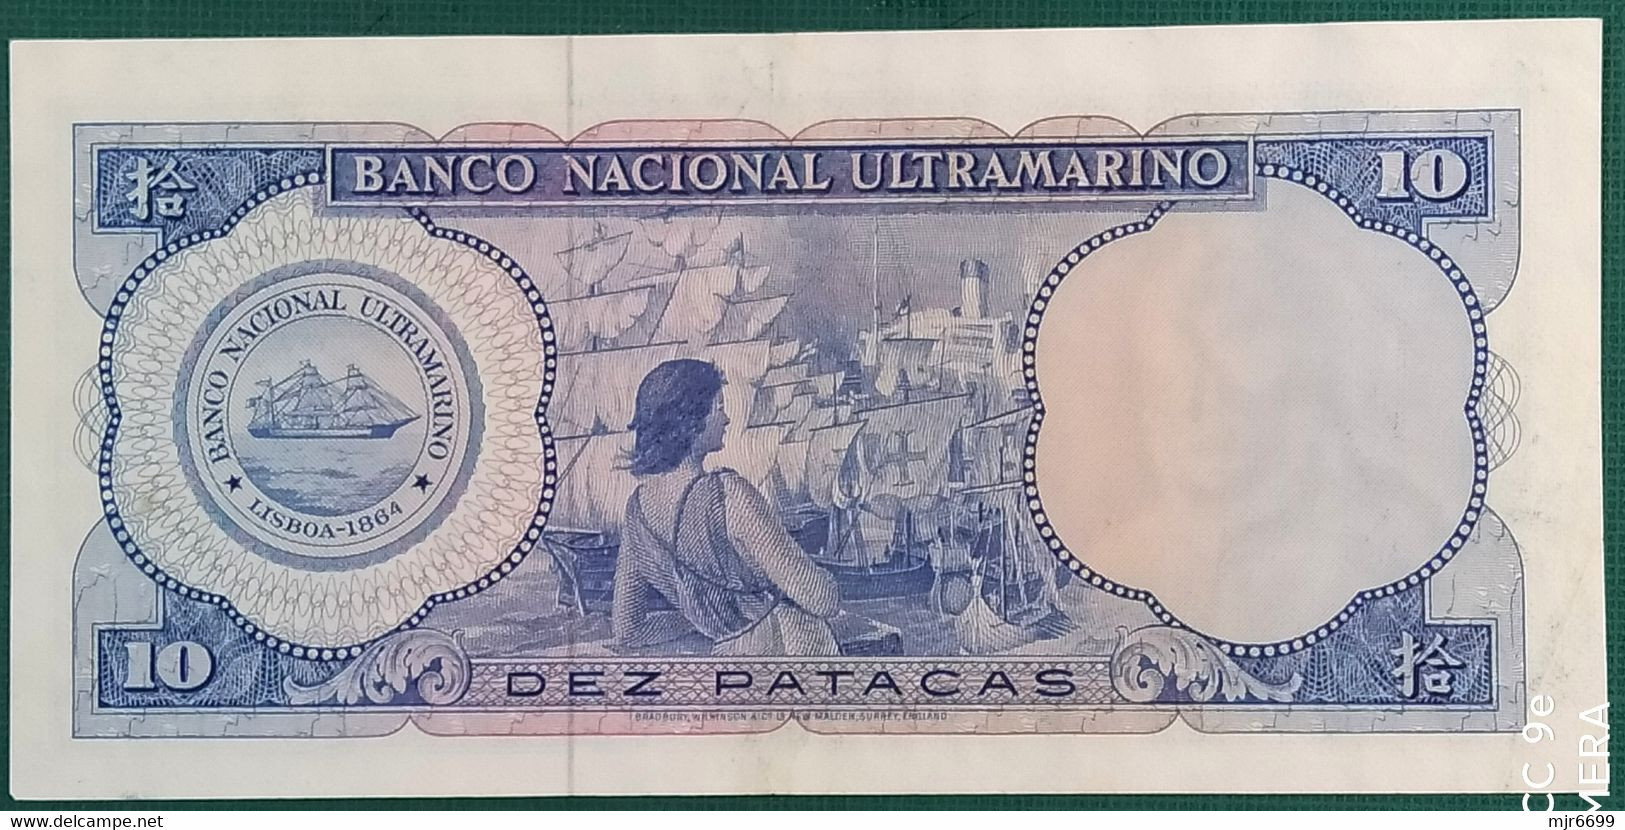 MACAU 1977 BANK NOTE 10 PATACAS FINE CIRCULATED WITH ONE MIDDLE FOLD - Macao